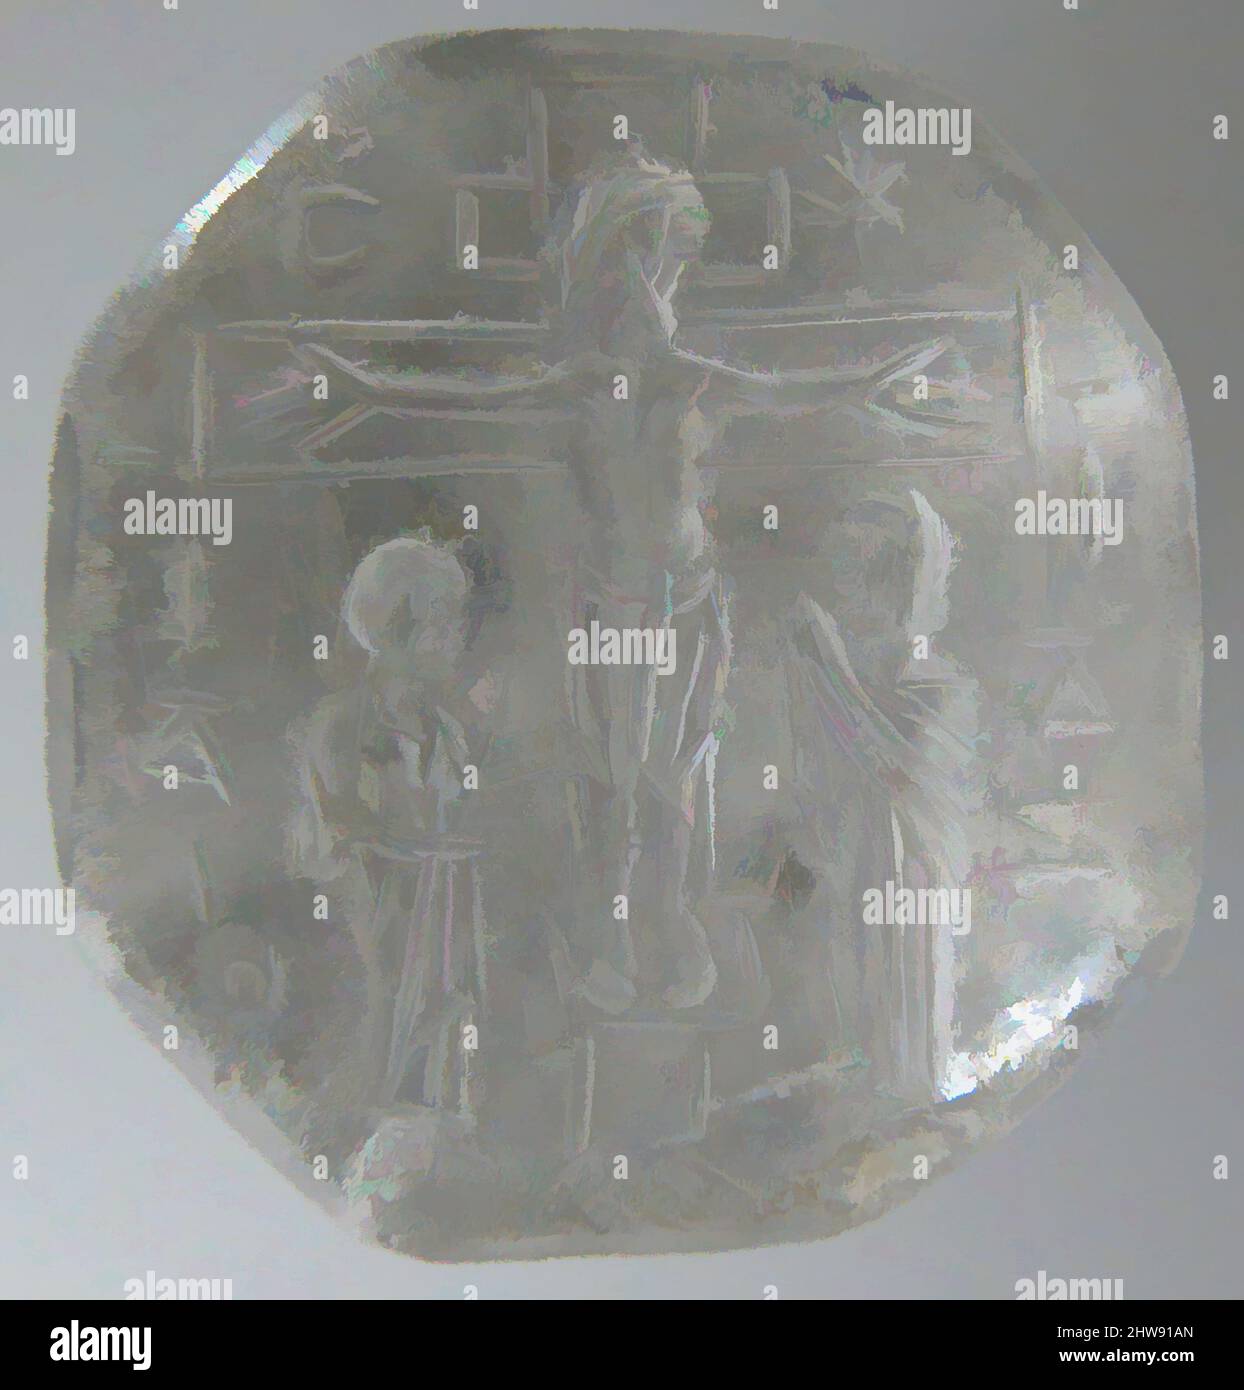 Art inspired by Intaglio Seal with the Crucifixion, 9th–11th century, Byzantine, Rock crystal, Overall: 13/16 x 11/16 x 15/16 in. (2 x 1.8 x 2.4 cm), Lapidary Work-Crystal, Pyramid-shaped seals were often carved of semiprecious stones believed to have protective properties. Hung from a, Classic works modernized by Artotop with a splash of modernity. Shapes, color and value, eye-catching visual impact on art. Emotions through freedom of artworks in a contemporary way. A timeless message pursuing a wildly creative new direction. Artists turning to the digital medium and creating the Artotop NFT Stock Photo